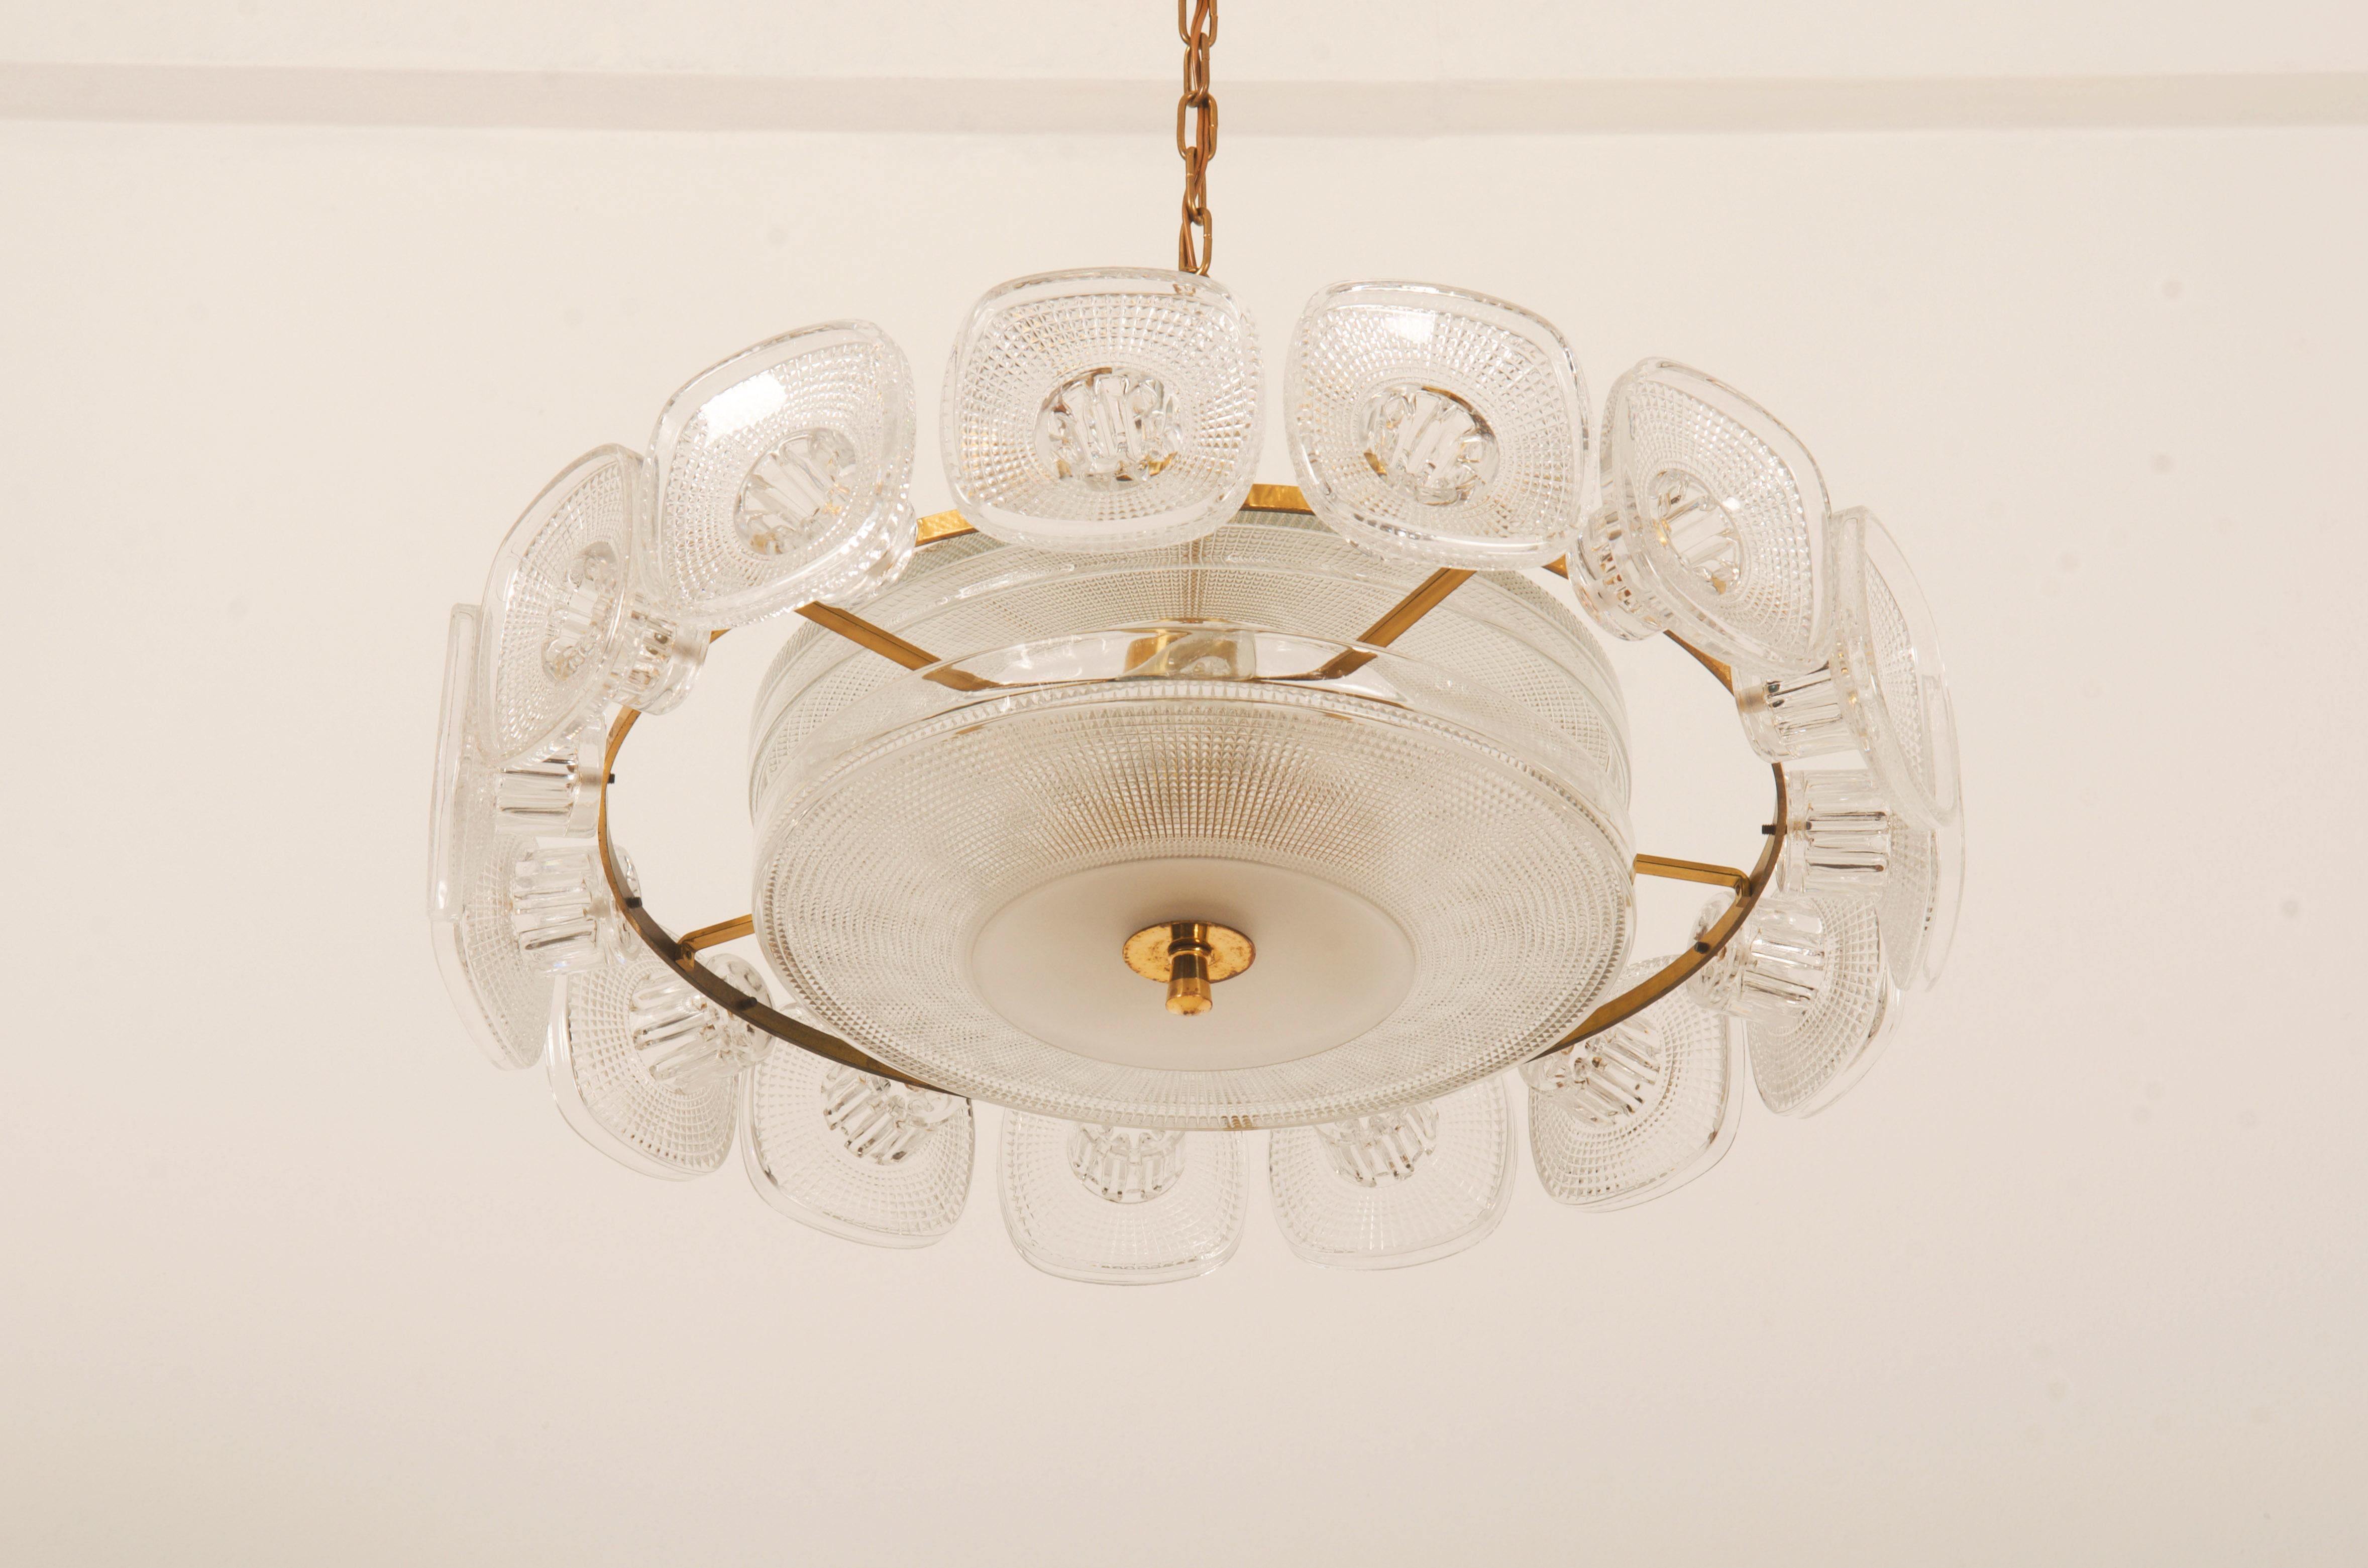 Beautiful Vineta Chandelier by Kjell Blomberg for Gullaskruf from the 1960s In Good Condition For Sale In Vienna, AT